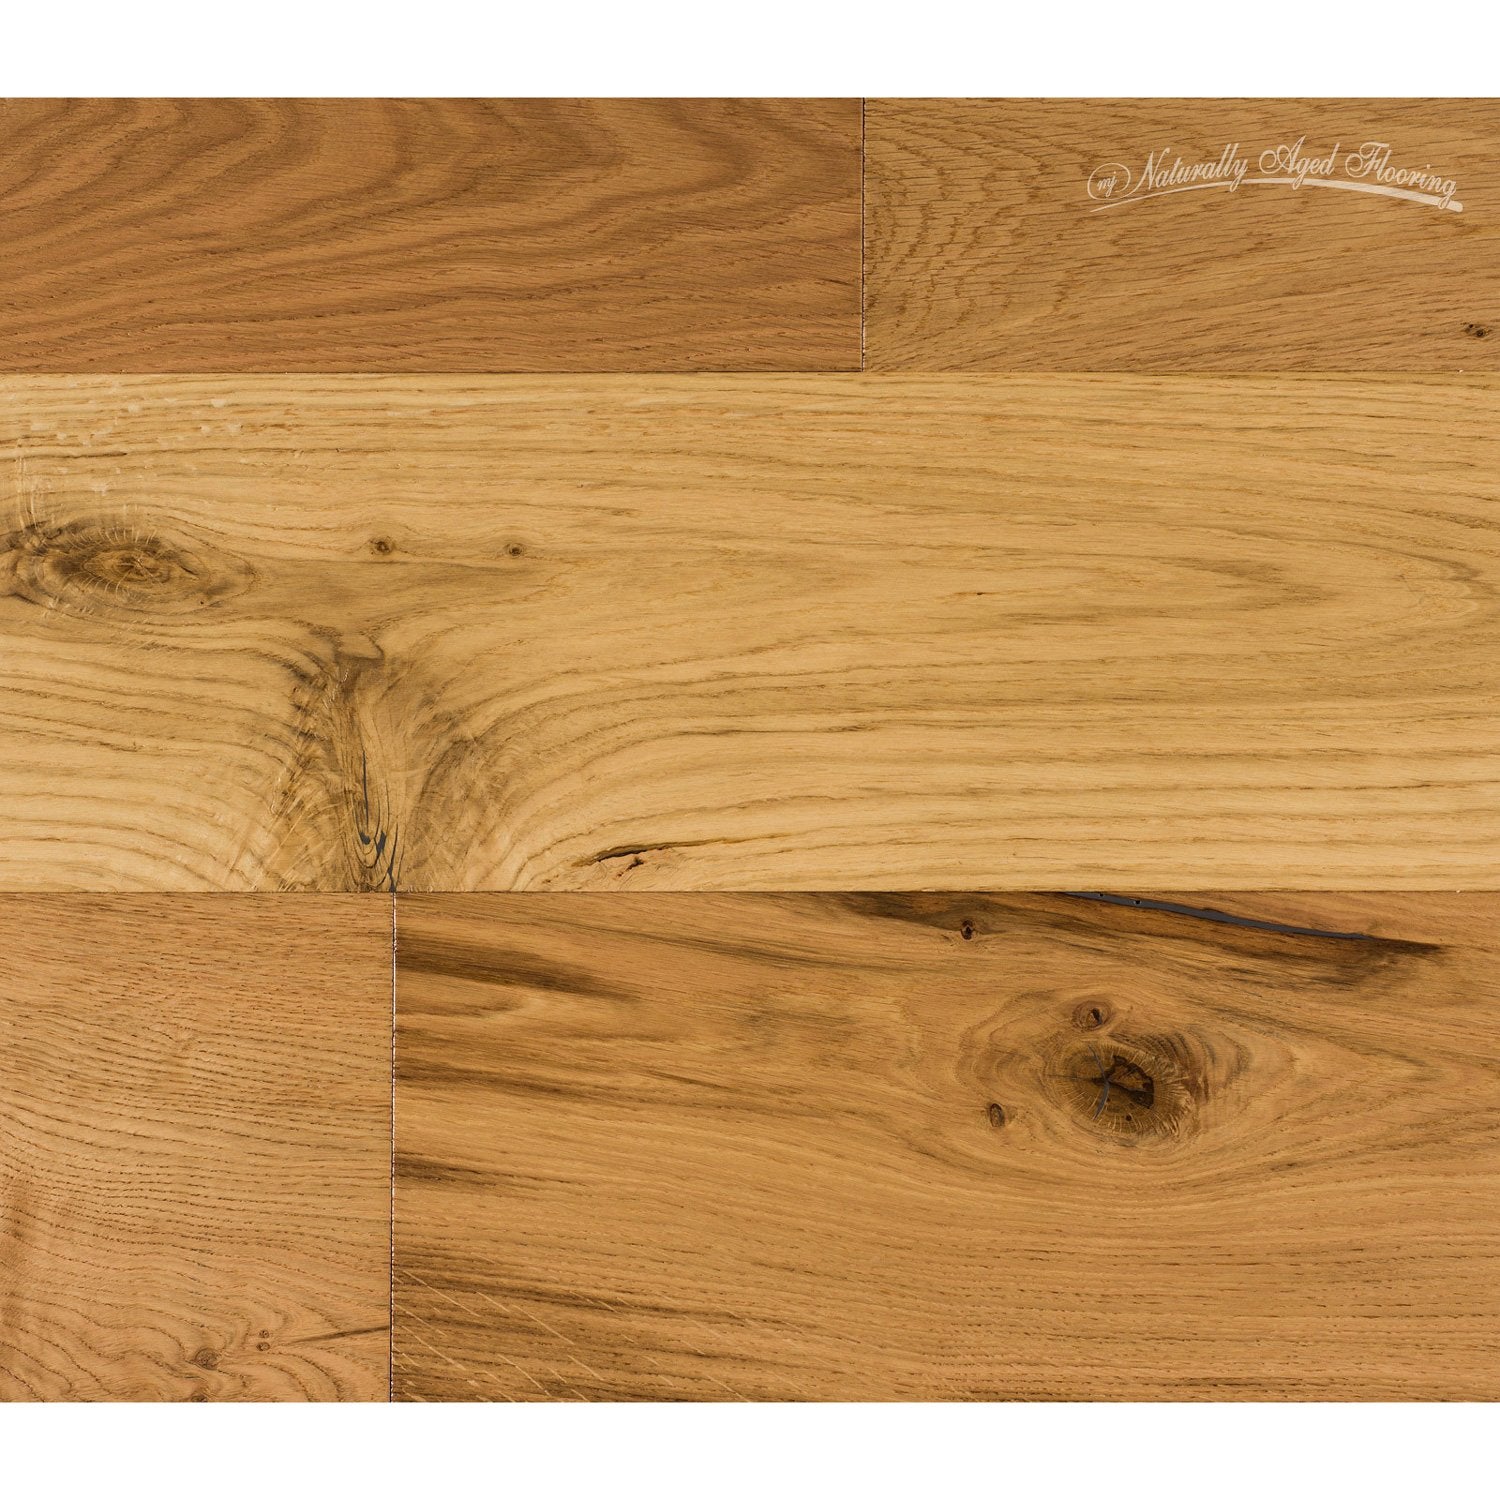 Naturally Aged Flooring - Wire Brushed Series, Oak Engineered Hardwood - Willow Wind